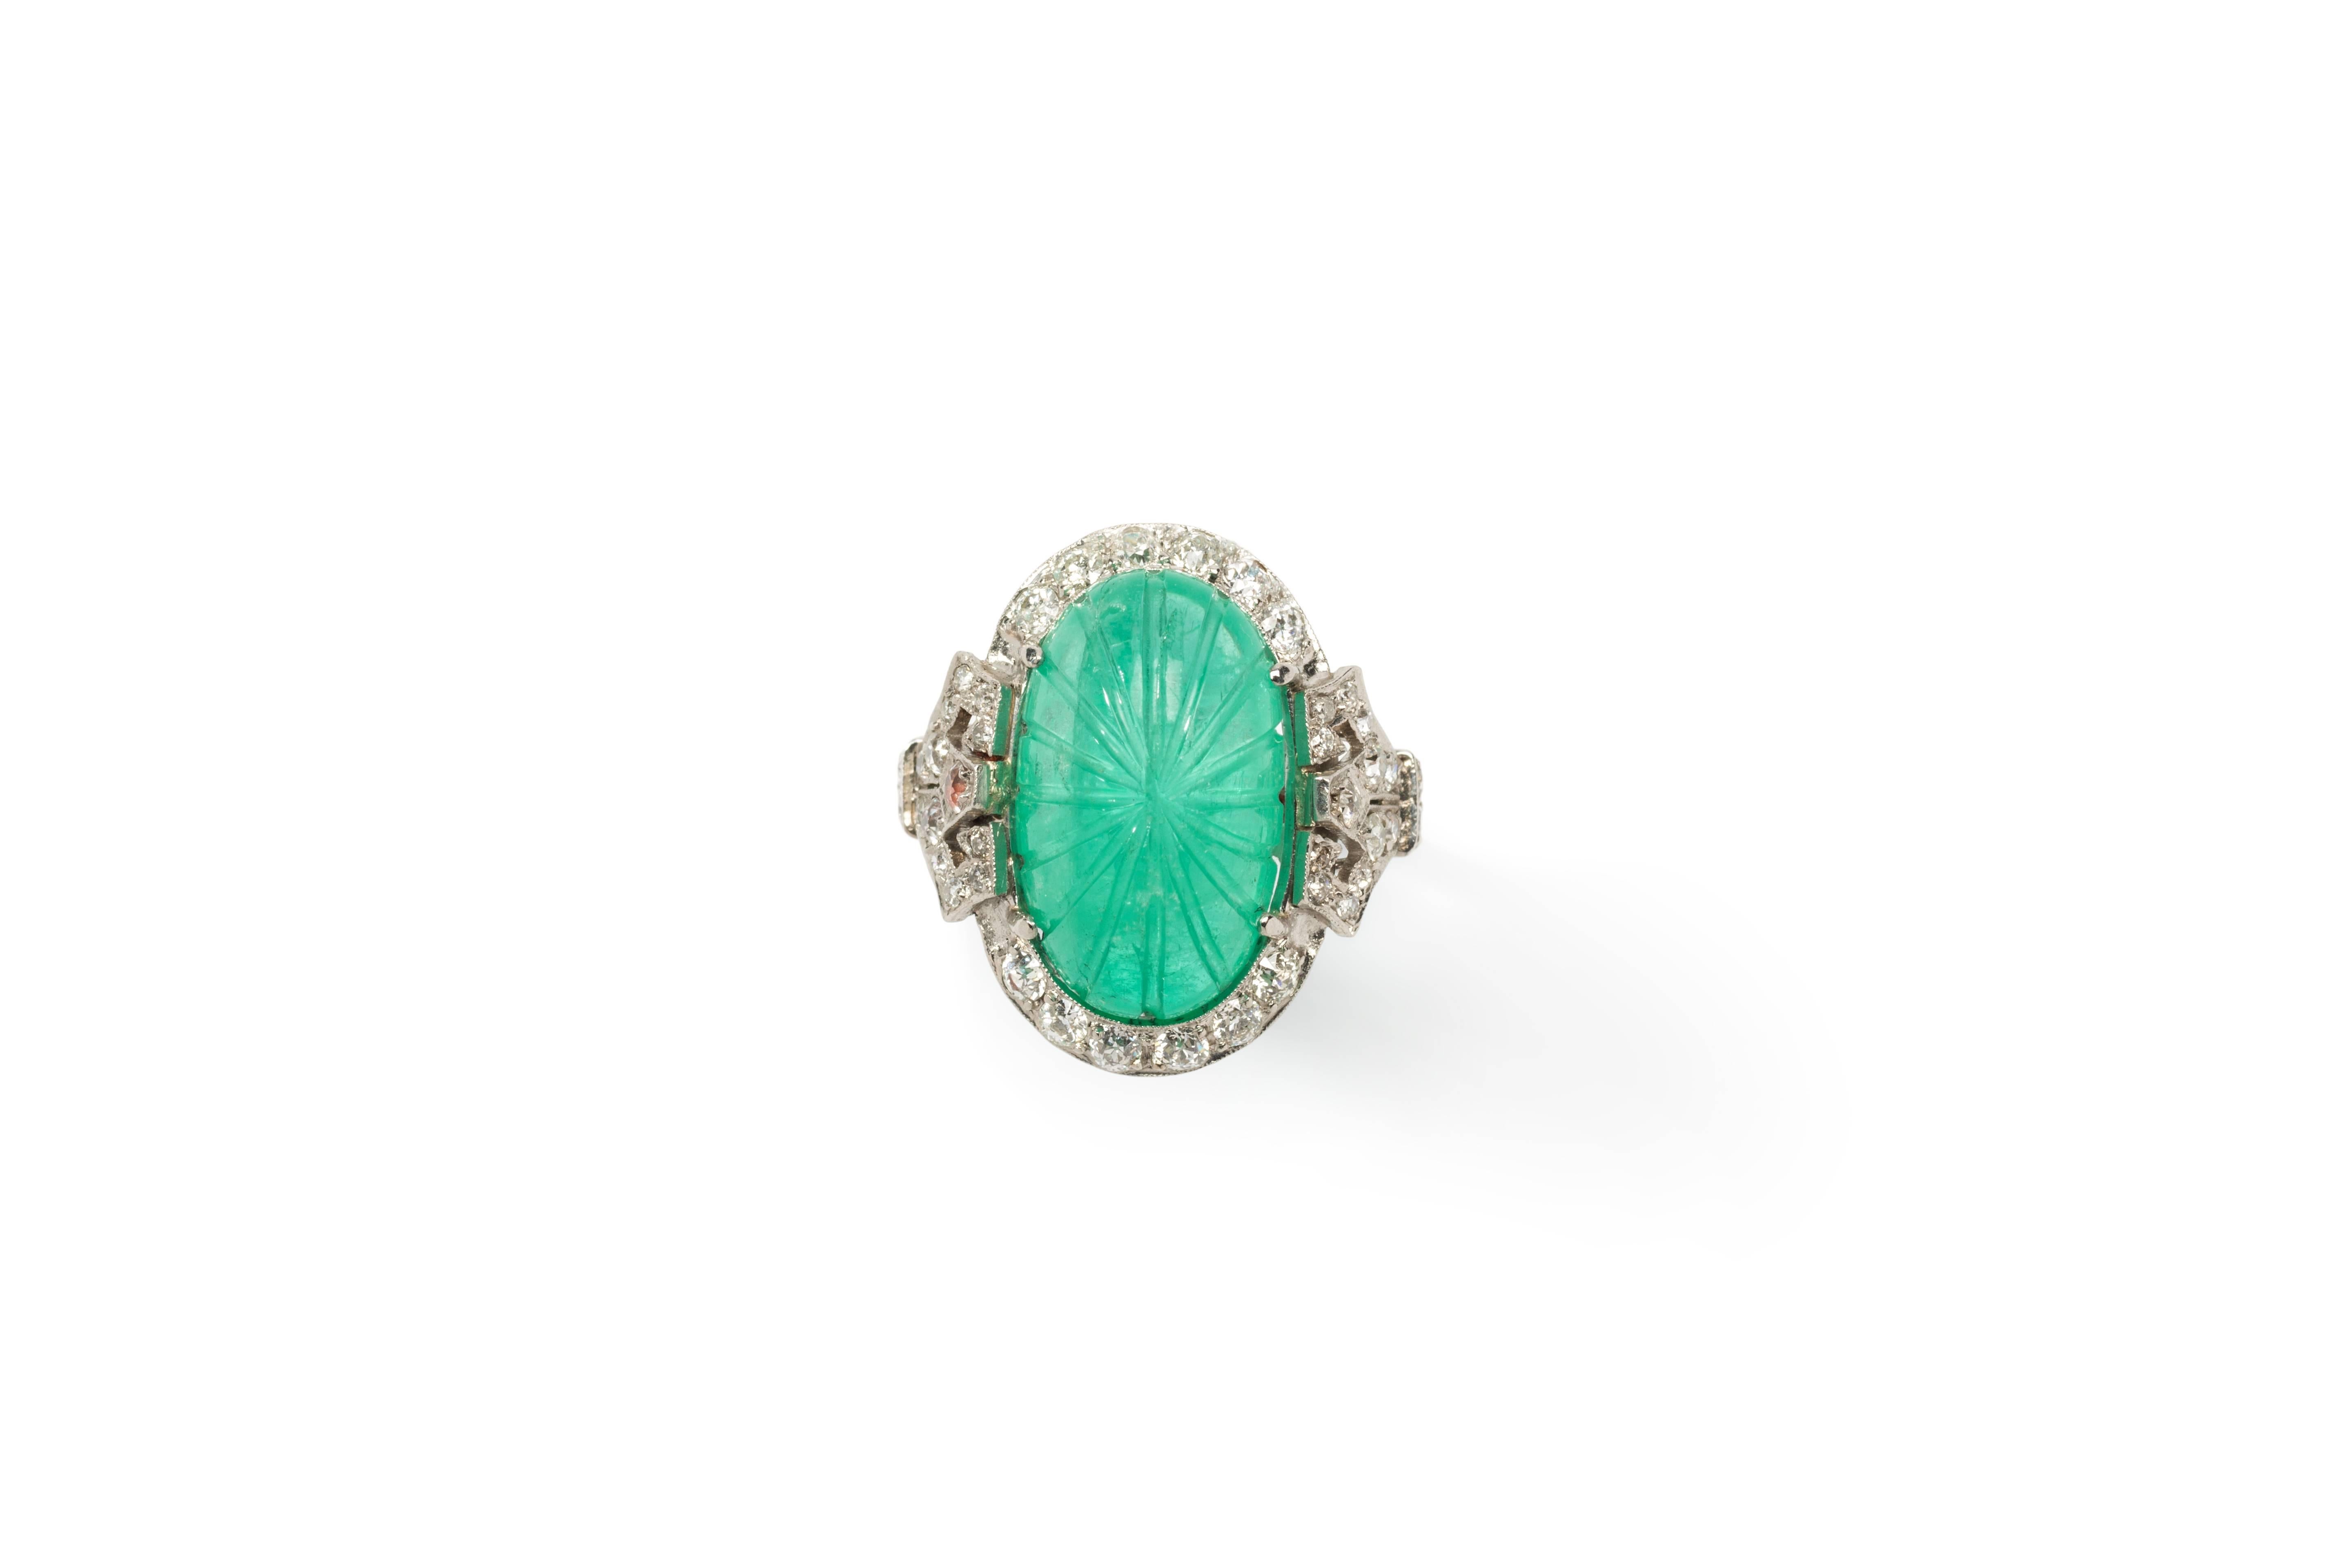 Art Deco ring with carved oval shaped Colombian emerald cabochon weighing 10,12 ct. Surroundet by 42 old-mine-cut diamonds with a total weight of 0,90 ct. clarity VS-SI, color wesselton. Mounted in platinum. Hallmarked inside with the purity 950.